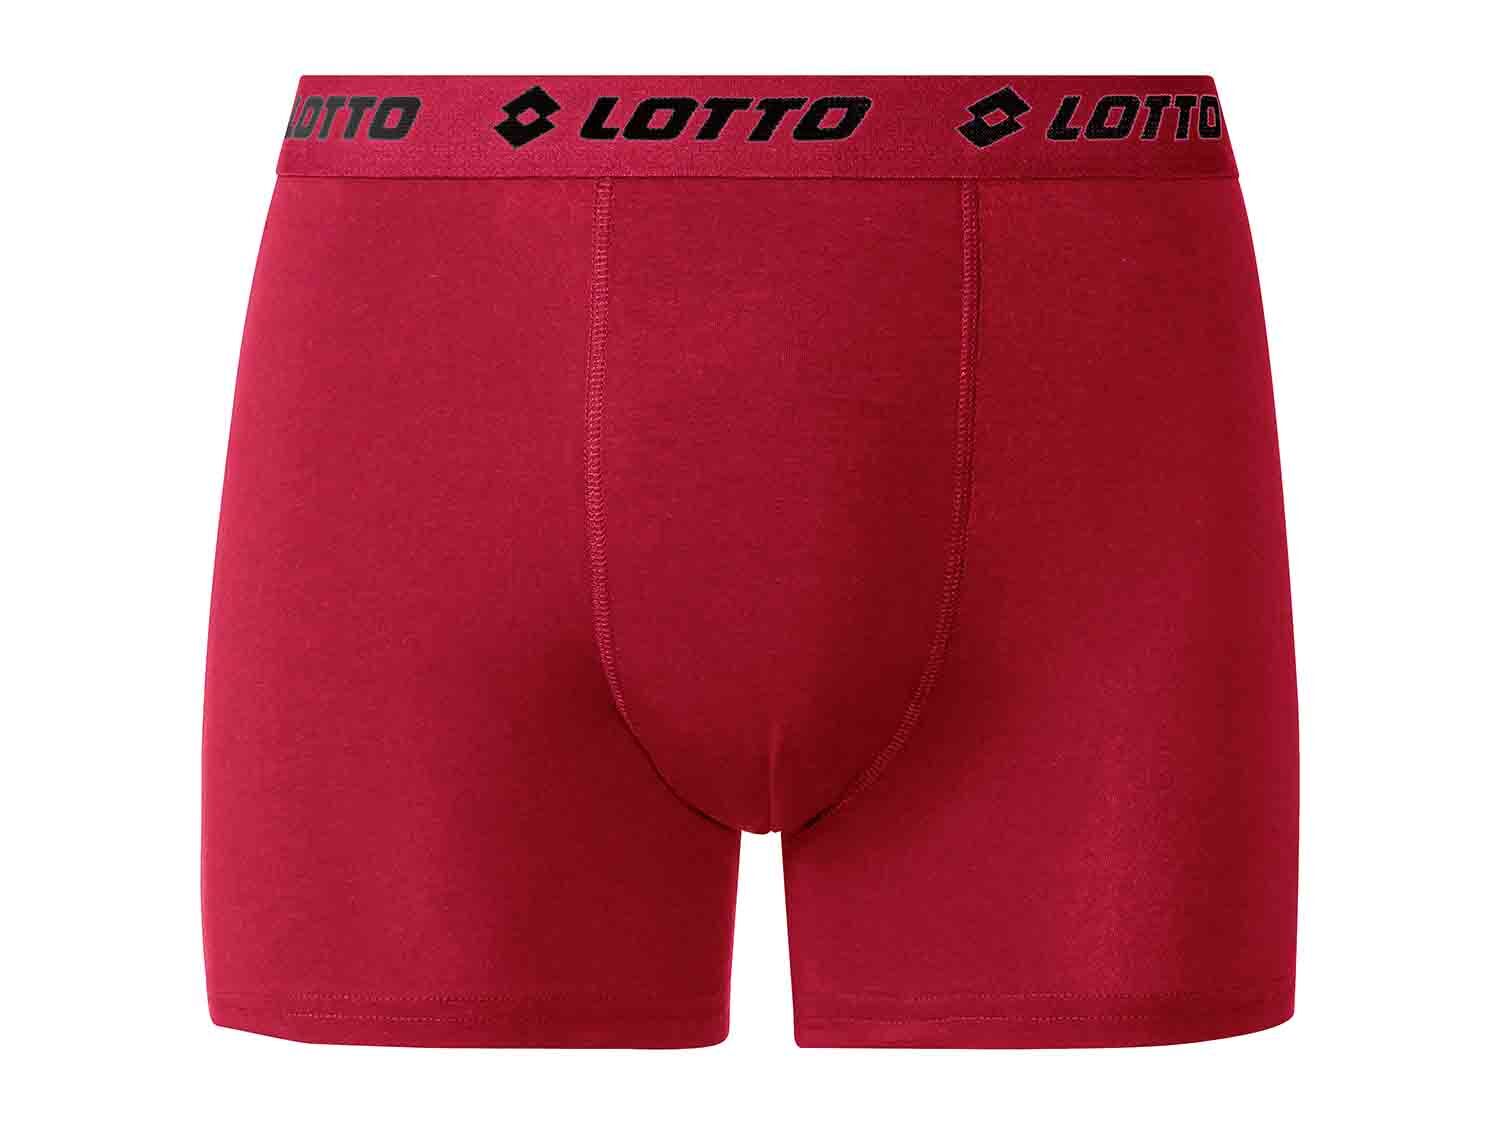 Lotto Calzoncillos boxer pack 2